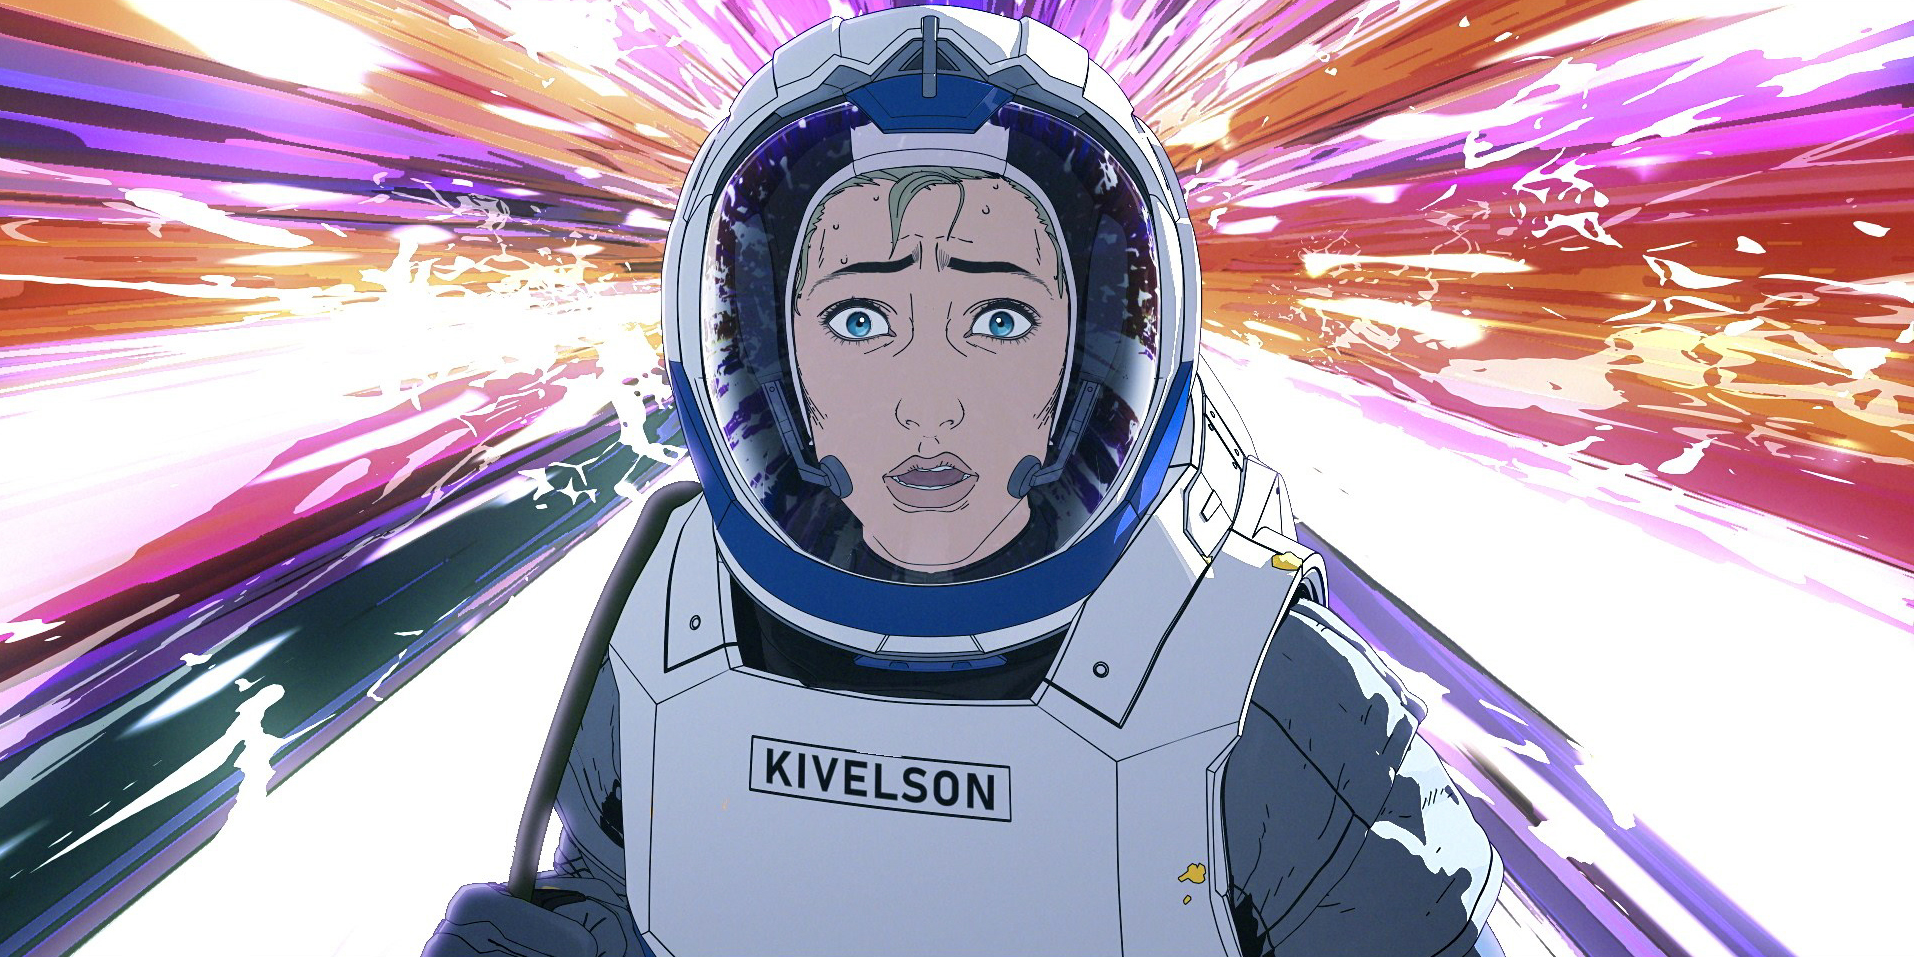 Kivelson hallucinating in Love Death and Robots